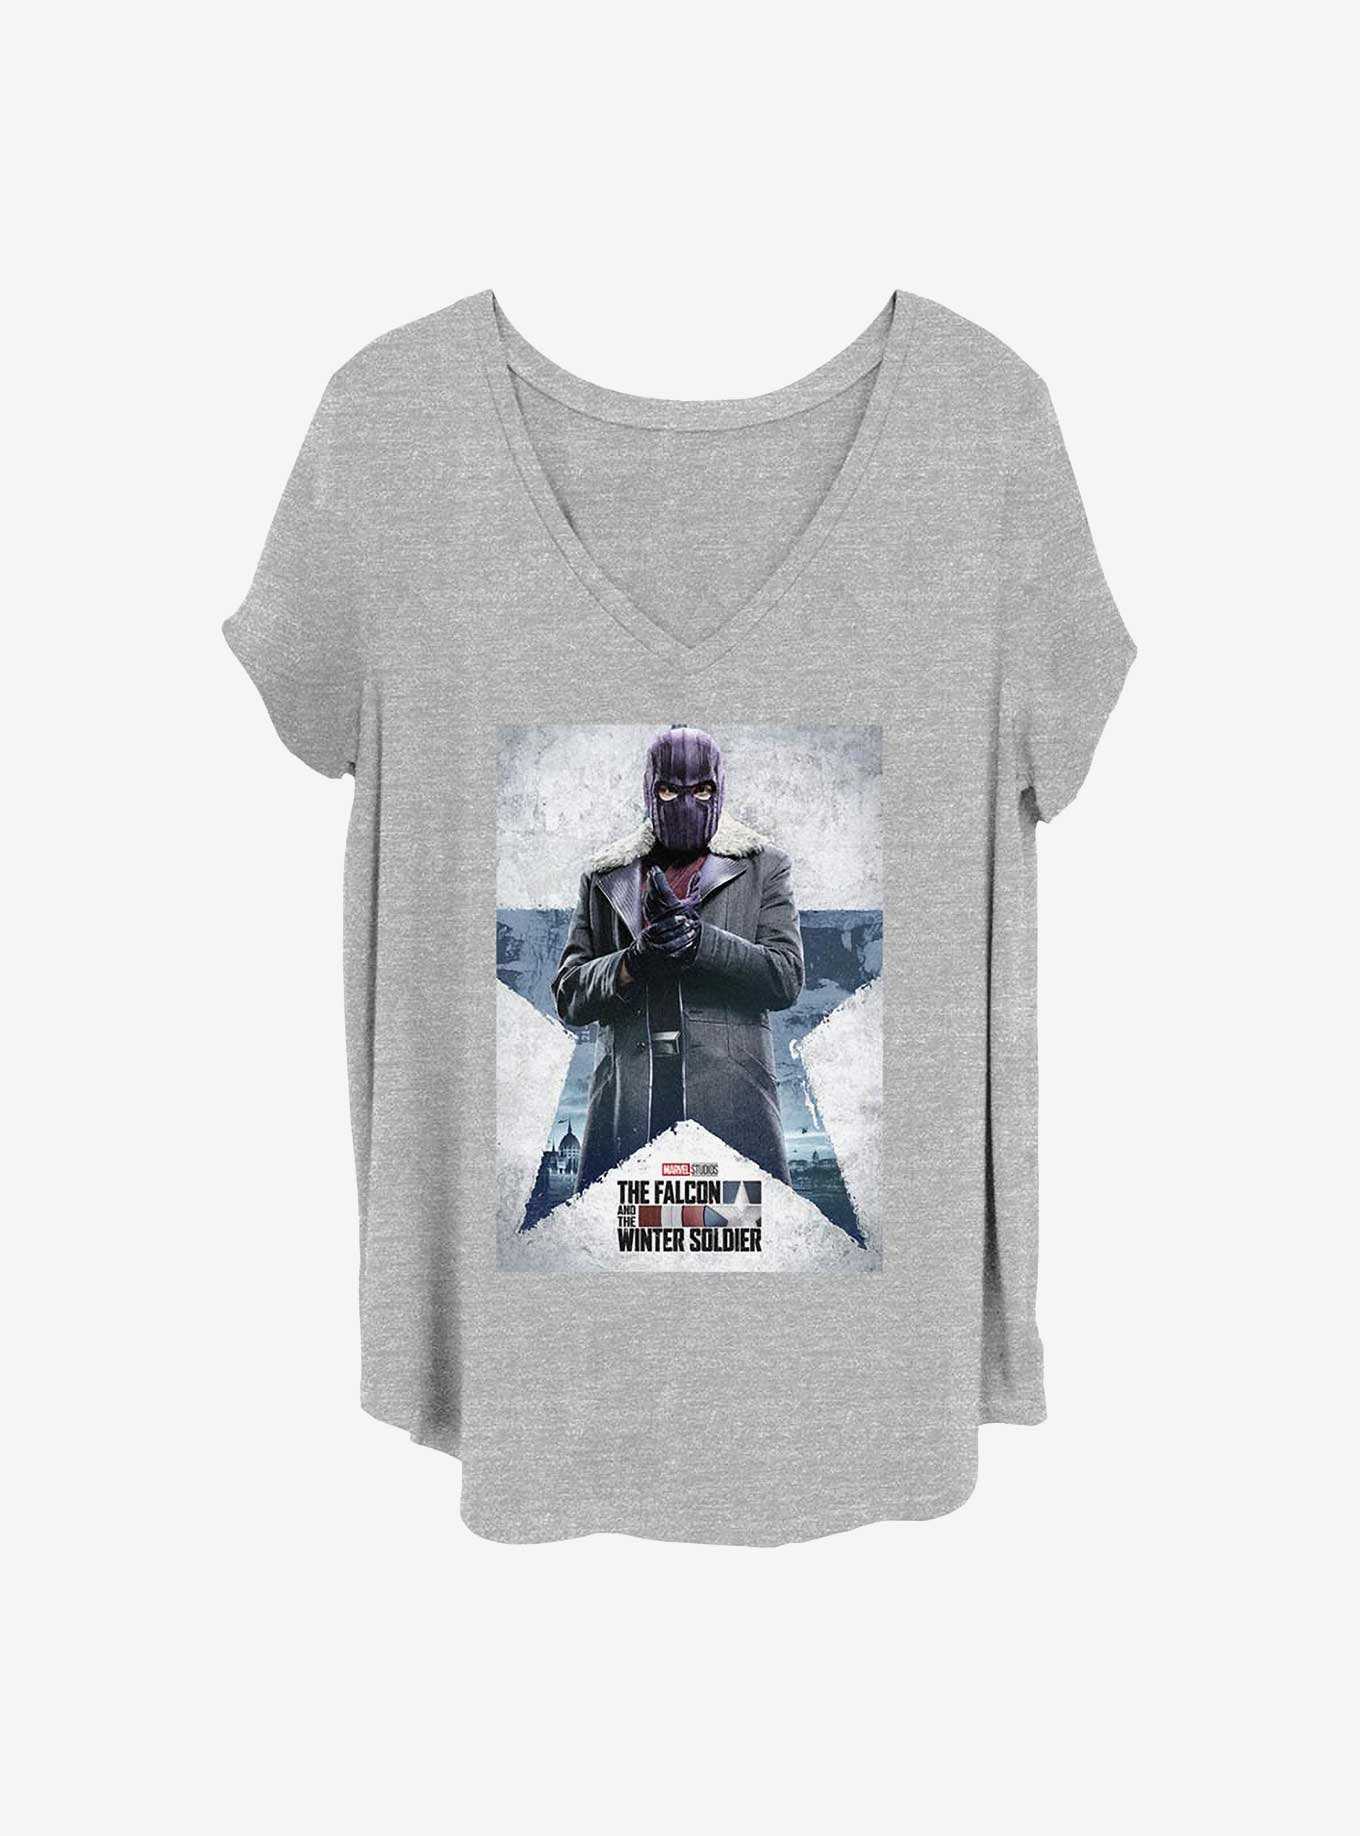 Marvel The Falcon and the Winter Soldier Zemo Poster Girls T-Shirt Plus Size, , hi-res